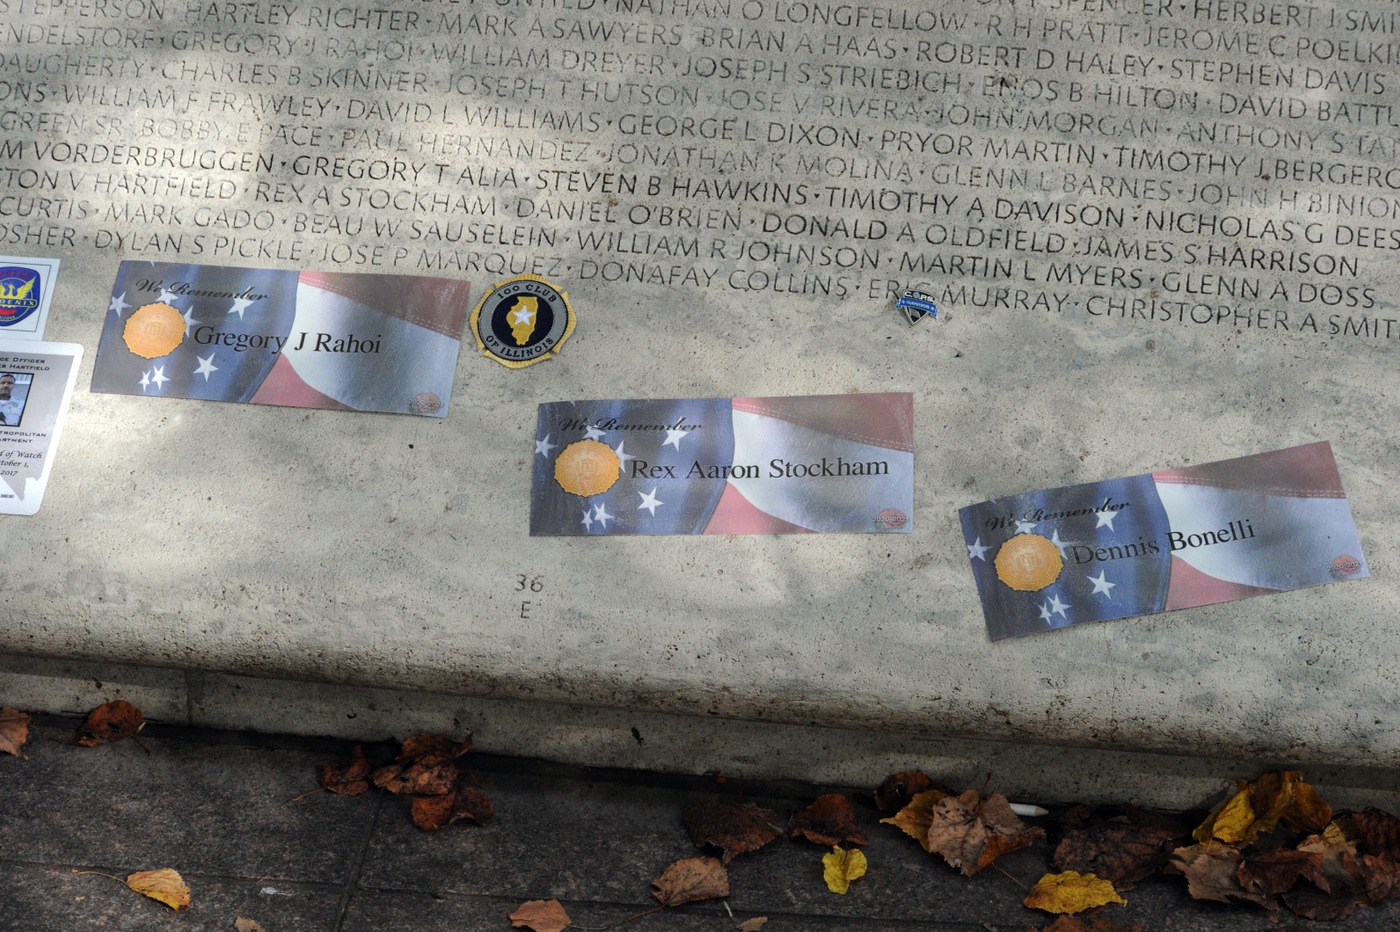 Mementos remembering fallen FBI personnel are seen at the National Law Enforcement Officers Memorial wall in Washington, D.C. during National Police Week observations on October 14, 2021.